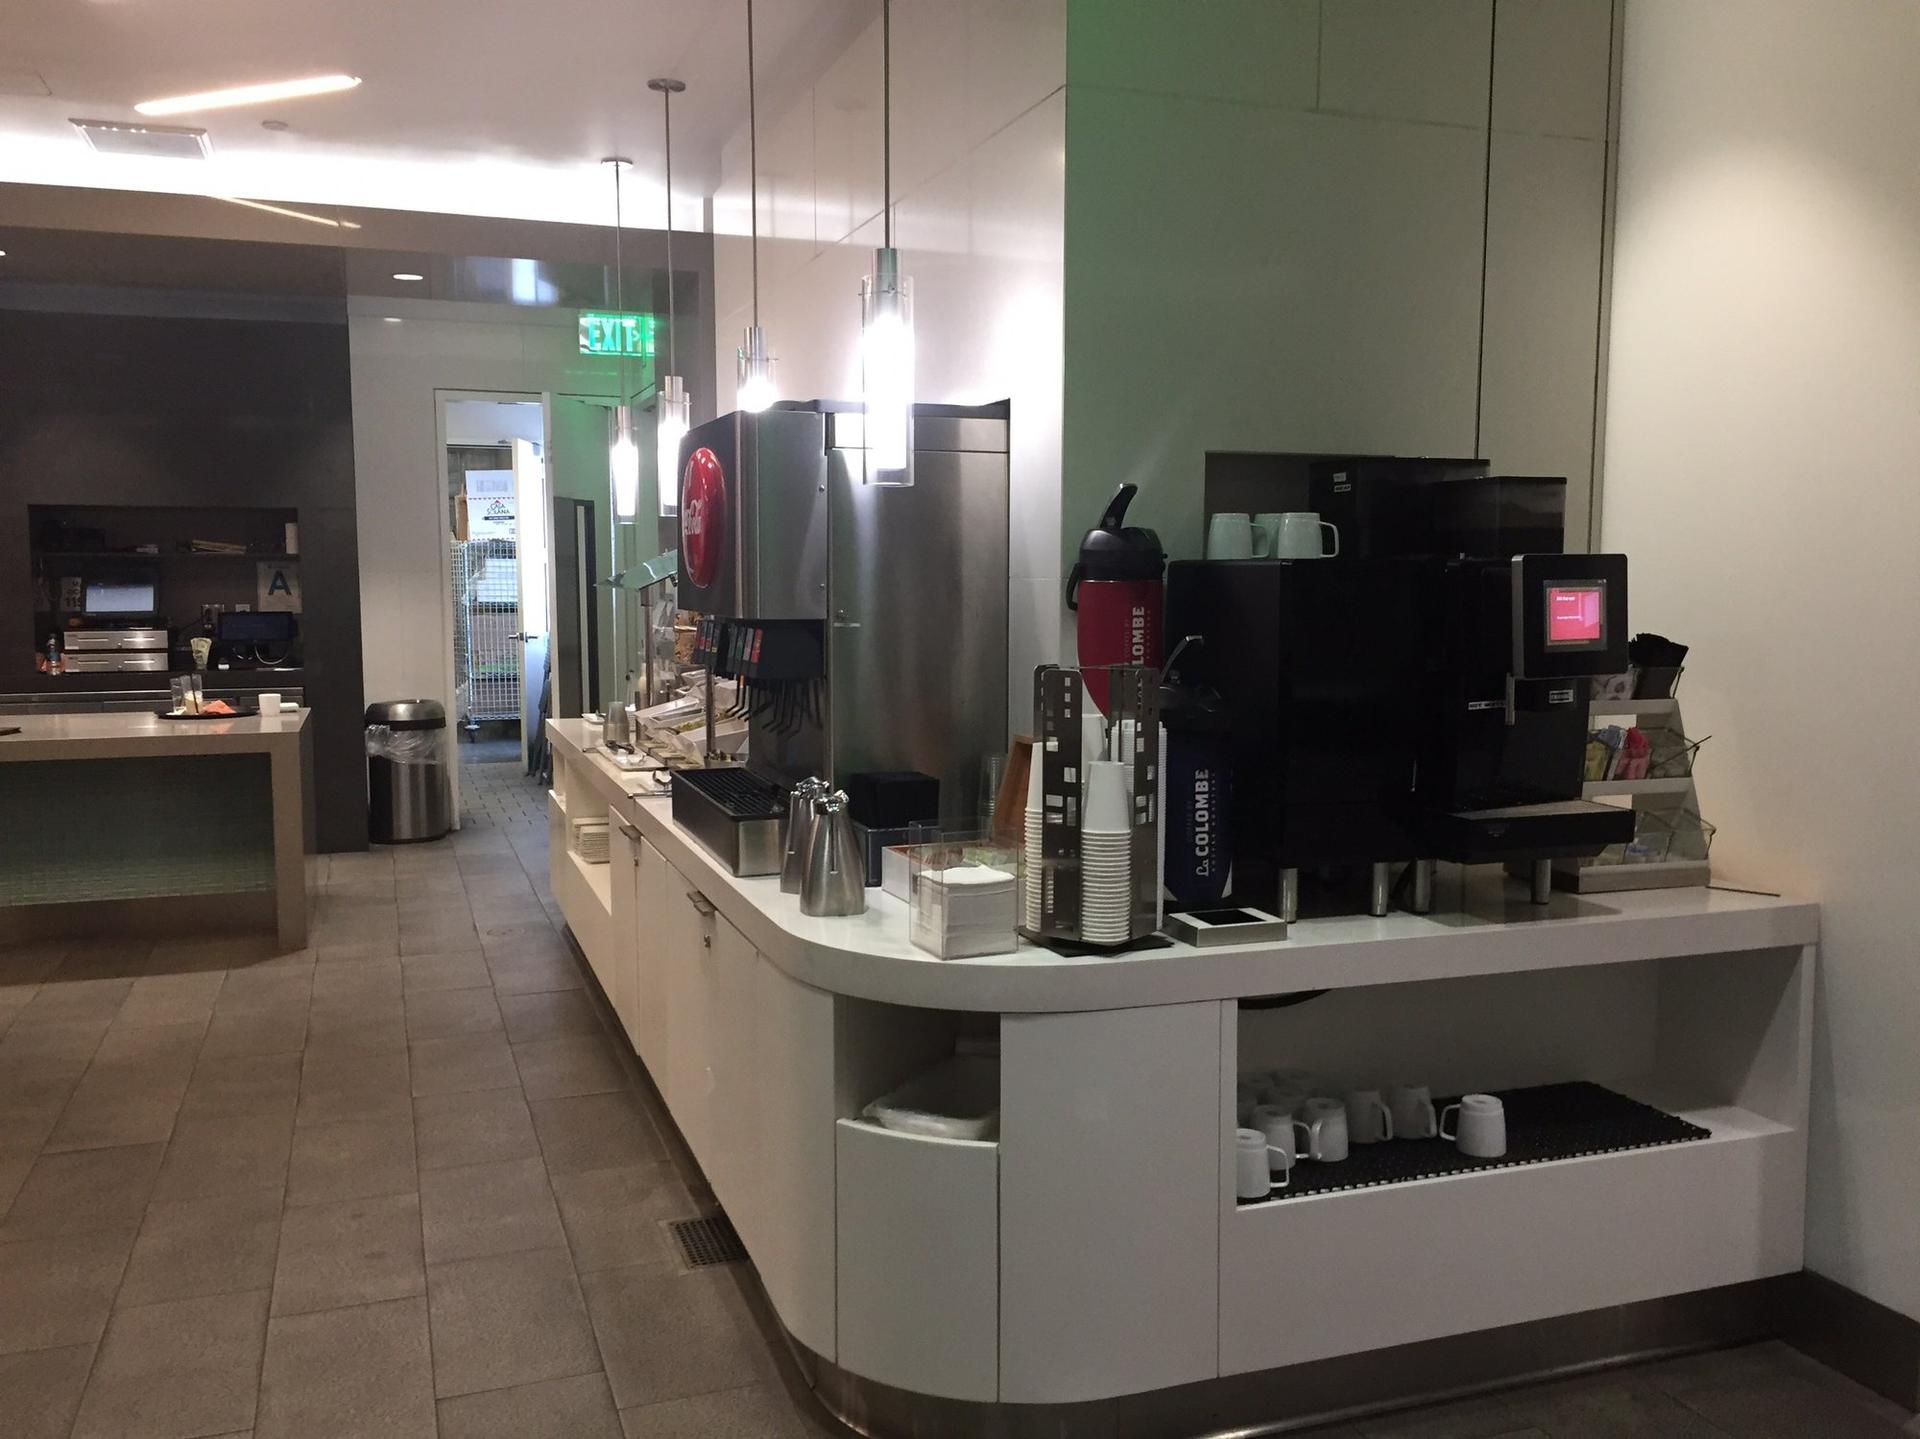 American Airlines Admirals Club image 31 of 43